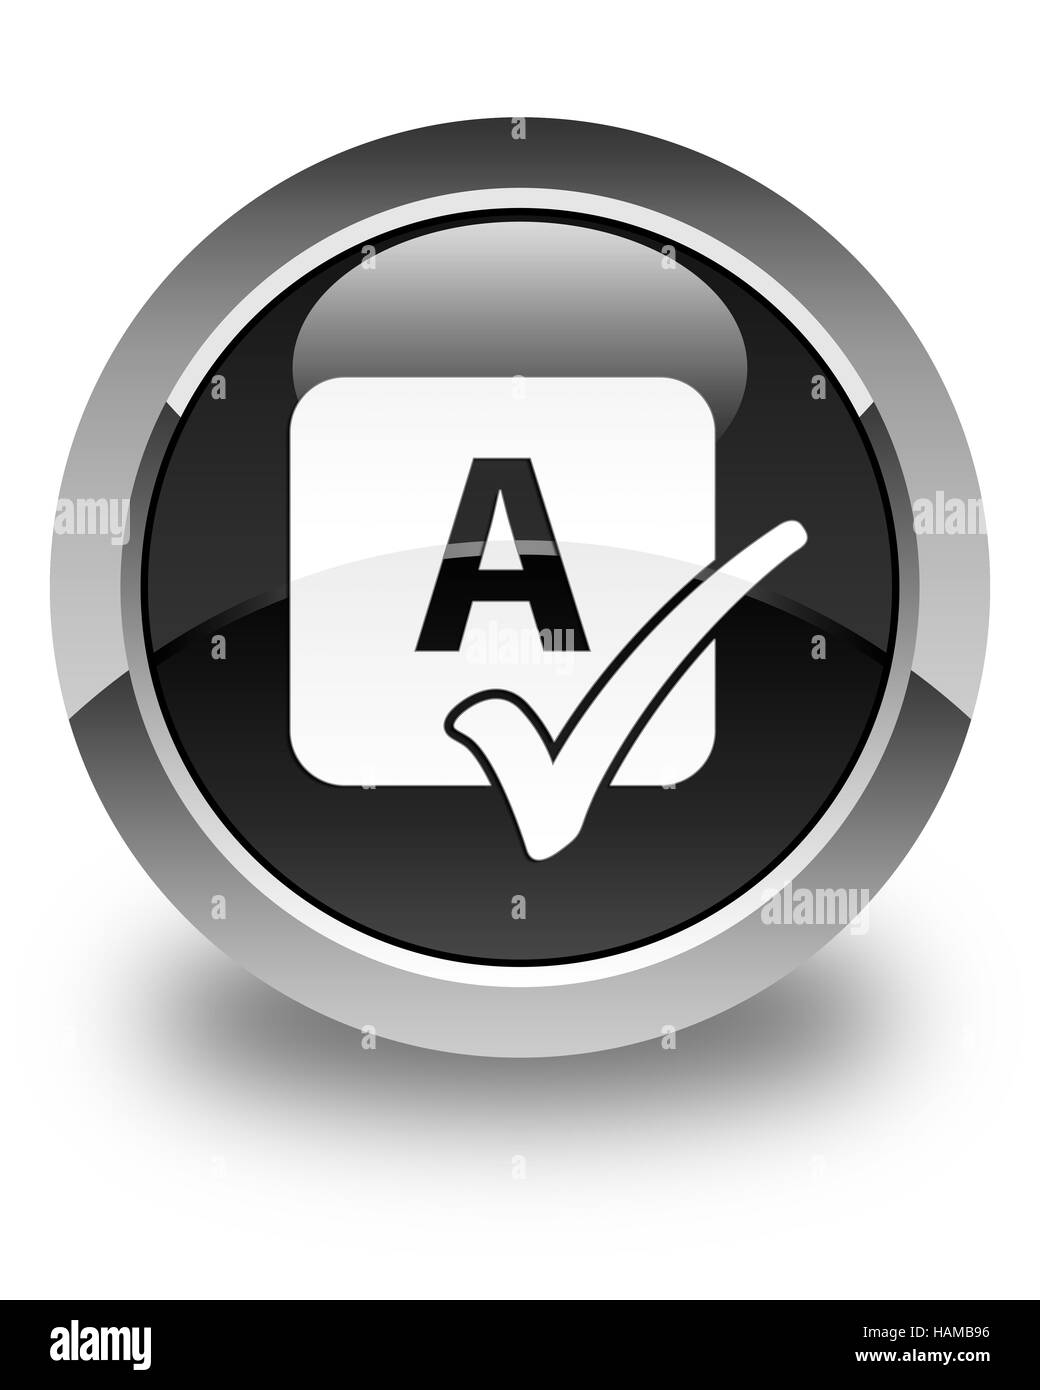 Spell check icon isolated on glossy black round button abstract illustration Stock Photo